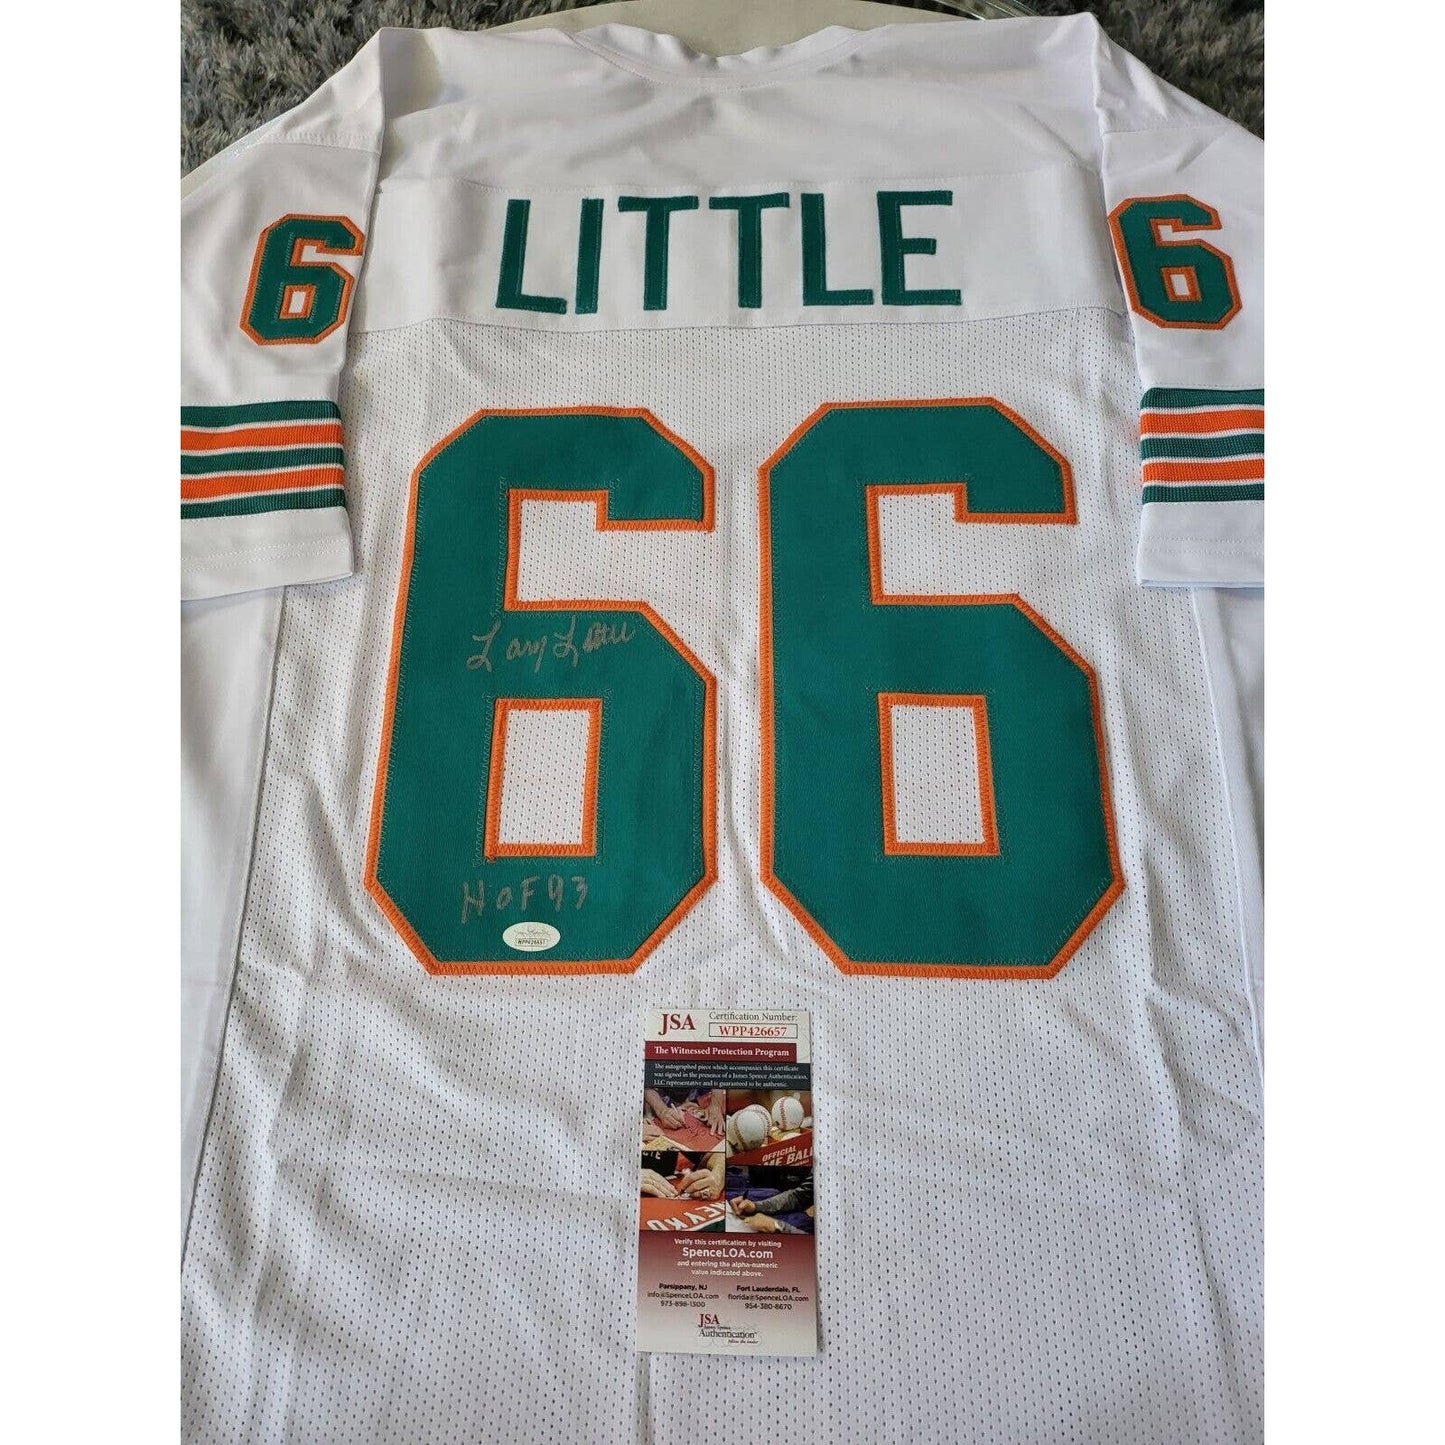 Larry Little Autographed/Signed Jersey Miami Dolphins 17-0 HOF - TreasuresEvolved